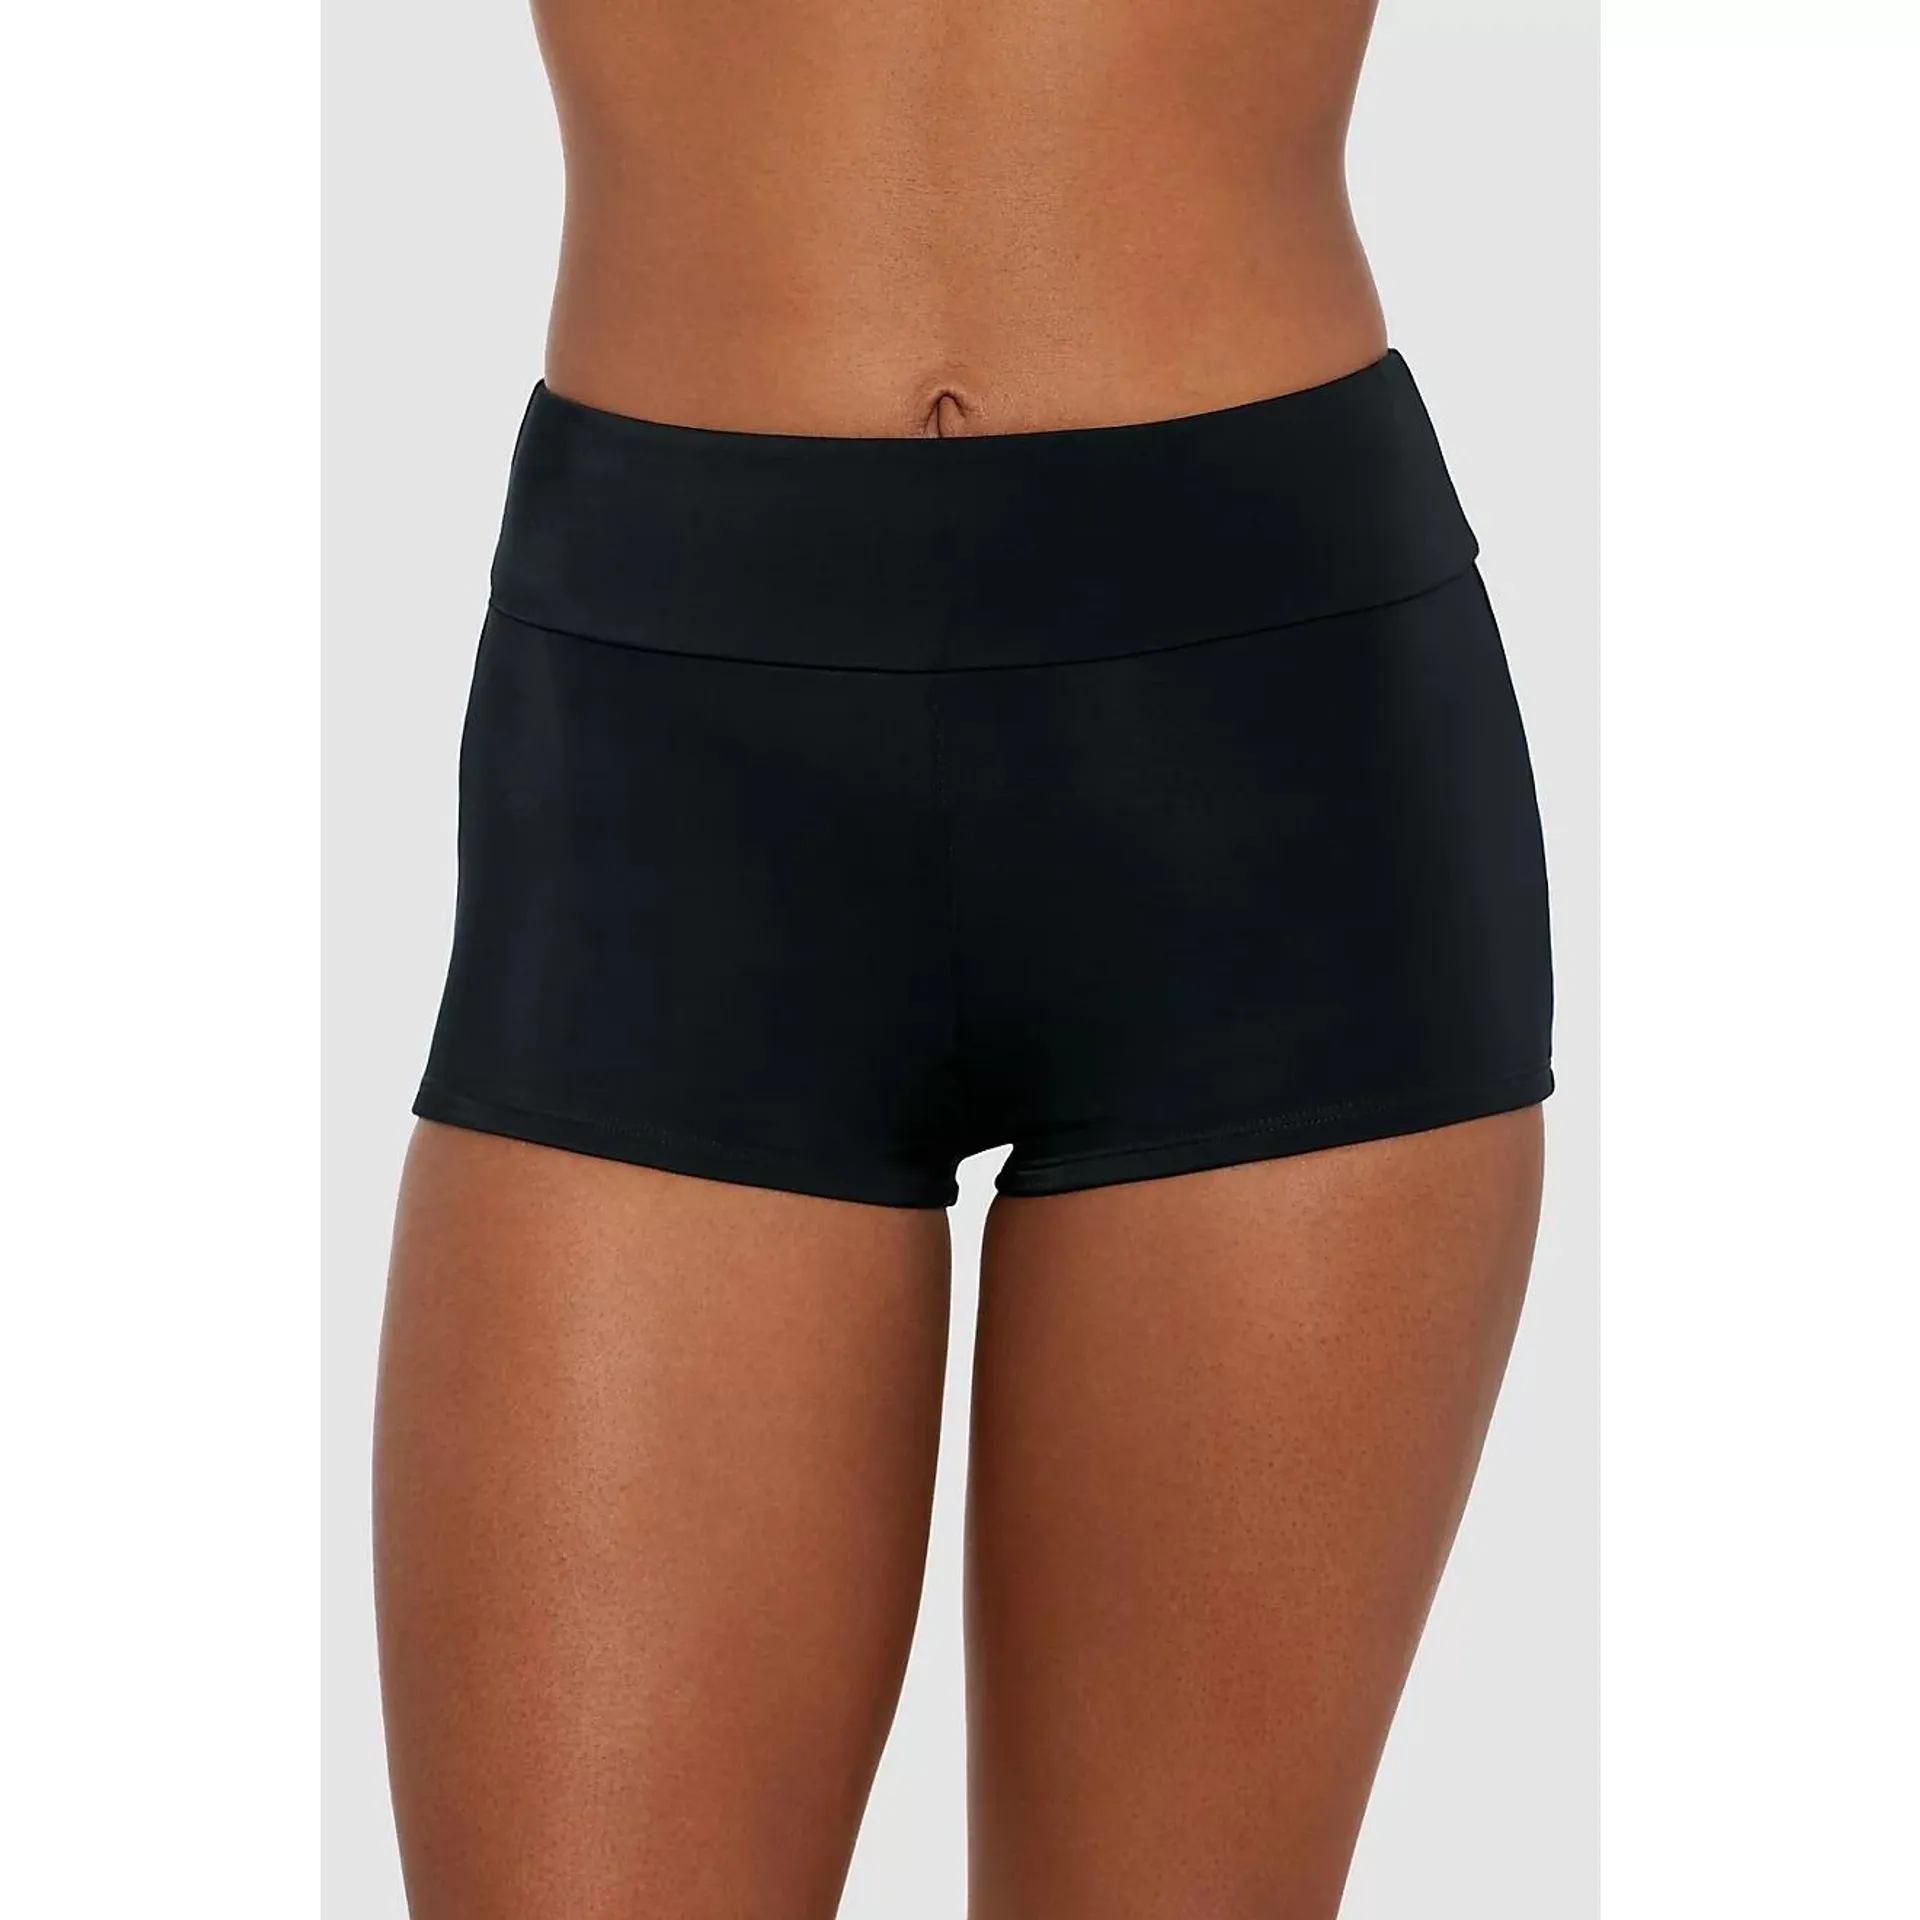 Freely Women's Solid Banded High-Waisted Swim Boy Shorts